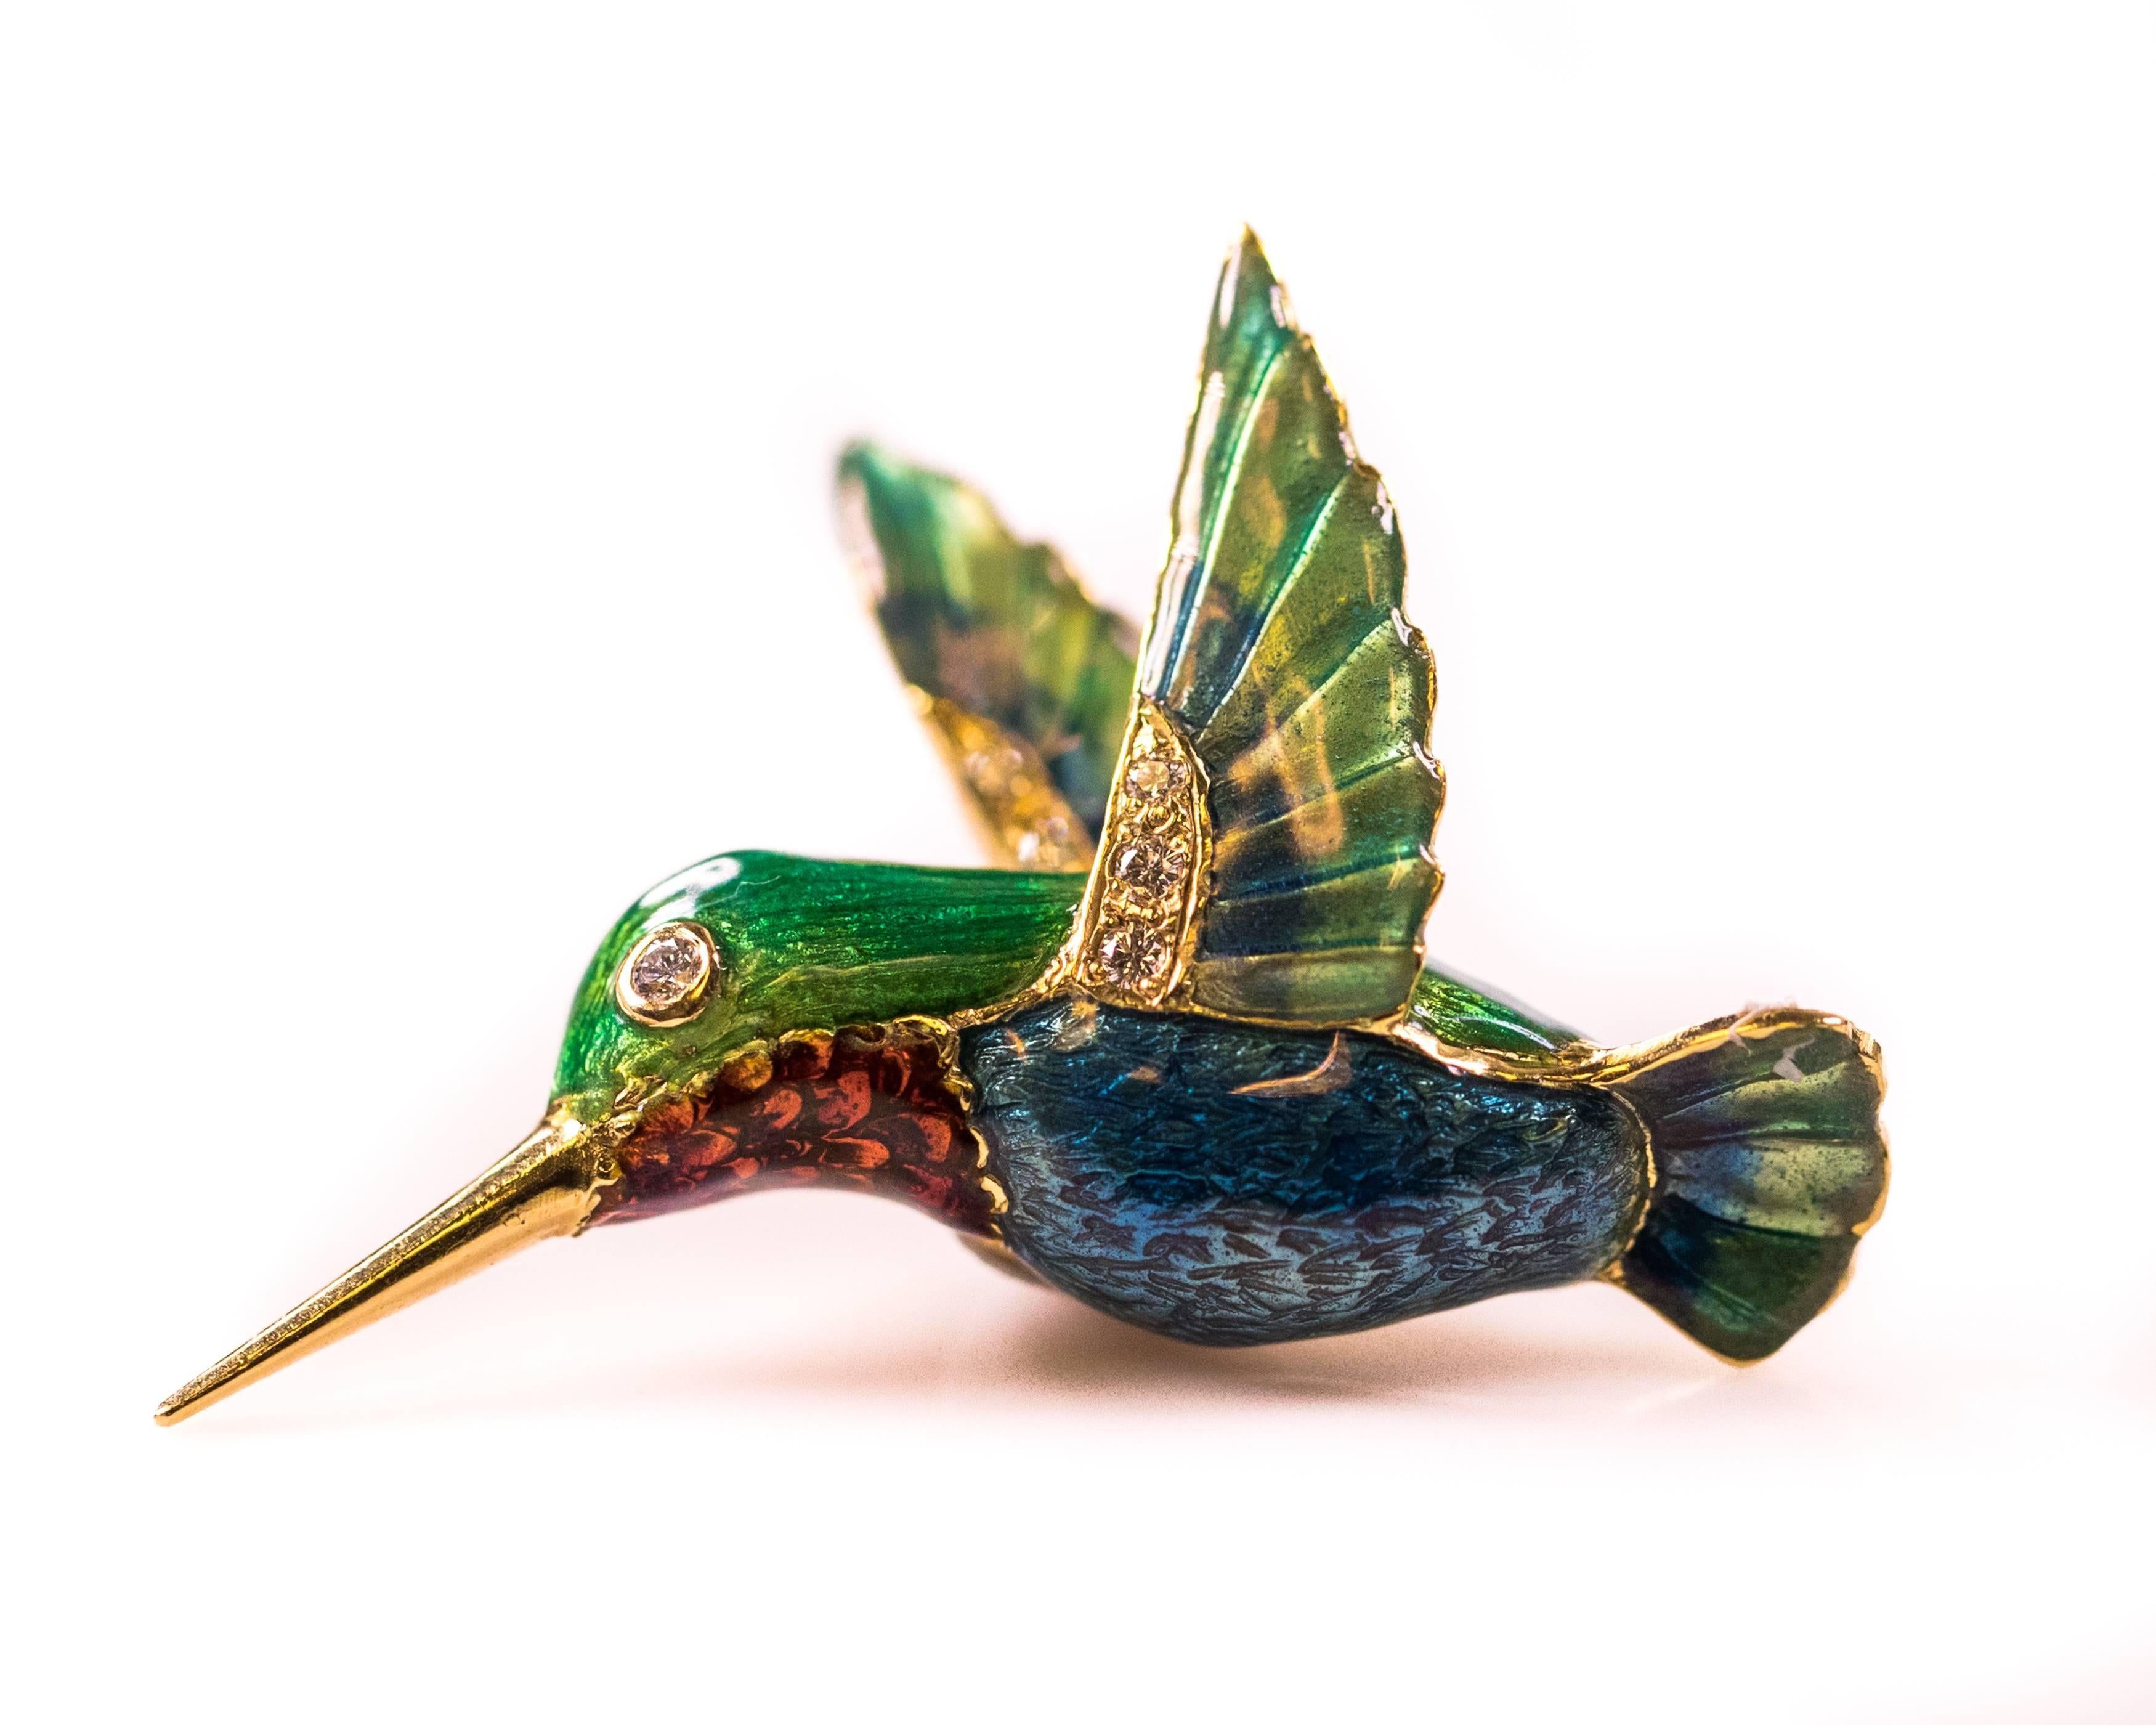 This Vibrantly Colored Hummingbird Pendant is sure to Enhance your Favorite necklace! Crafted from 18 Karat Yellow Gold, this vintage 1980s charm features 6 diamonds and exquisitely detailed, brightly colored enamelwork. The Hummingbird's head,